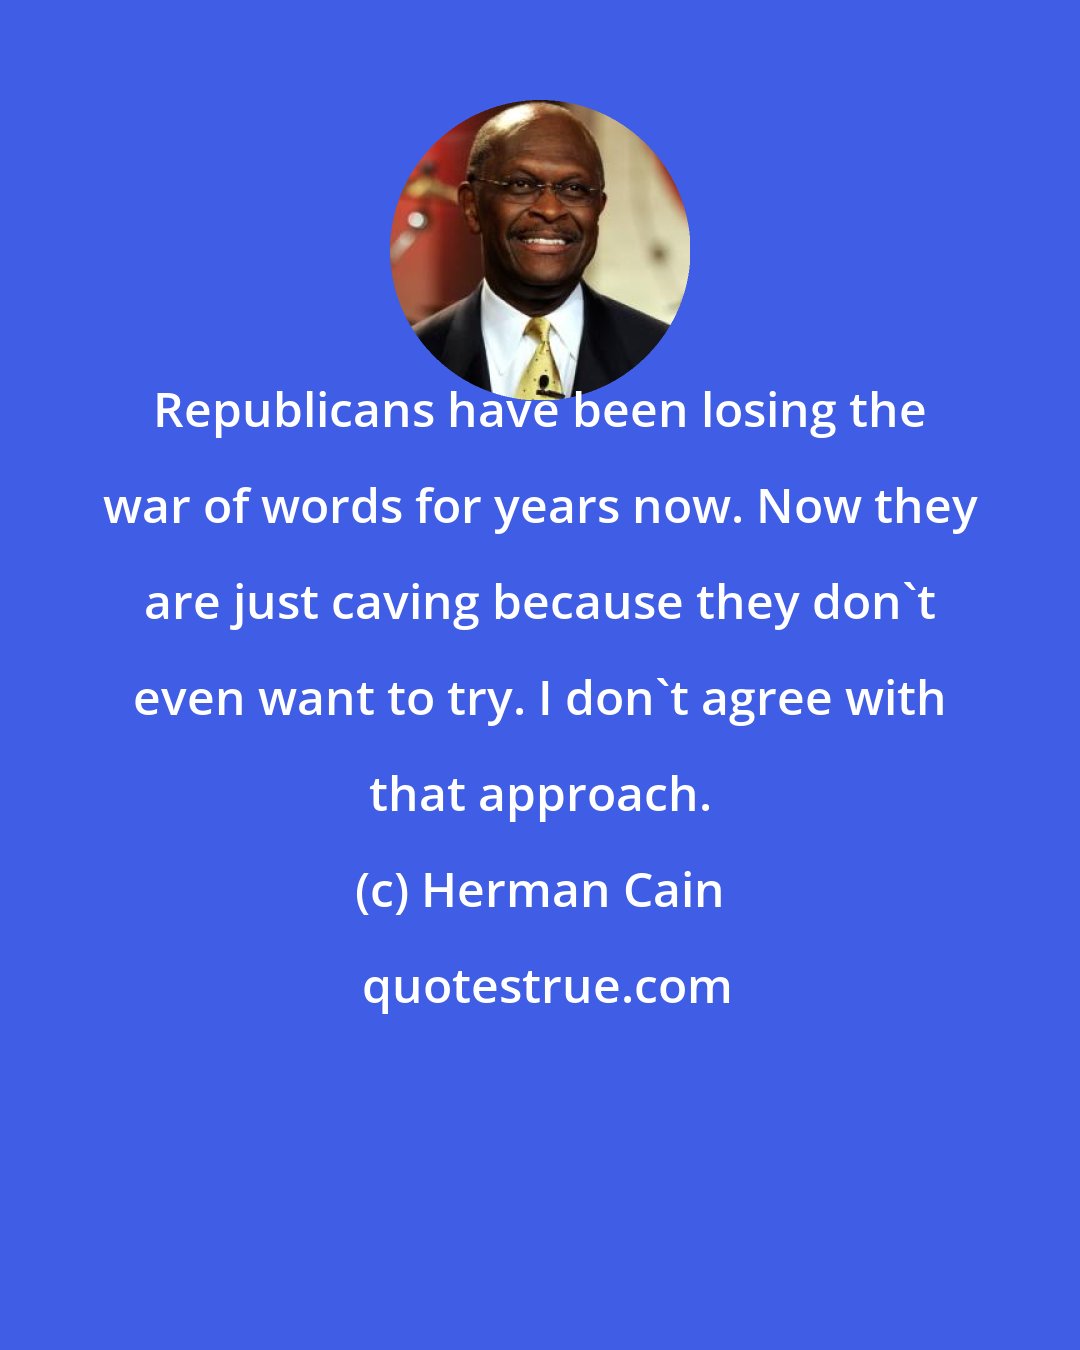 Herman Cain: Republicans have been losing the war of words for years now. Now they are just caving because they don't even want to try. I don't agree with that approach.